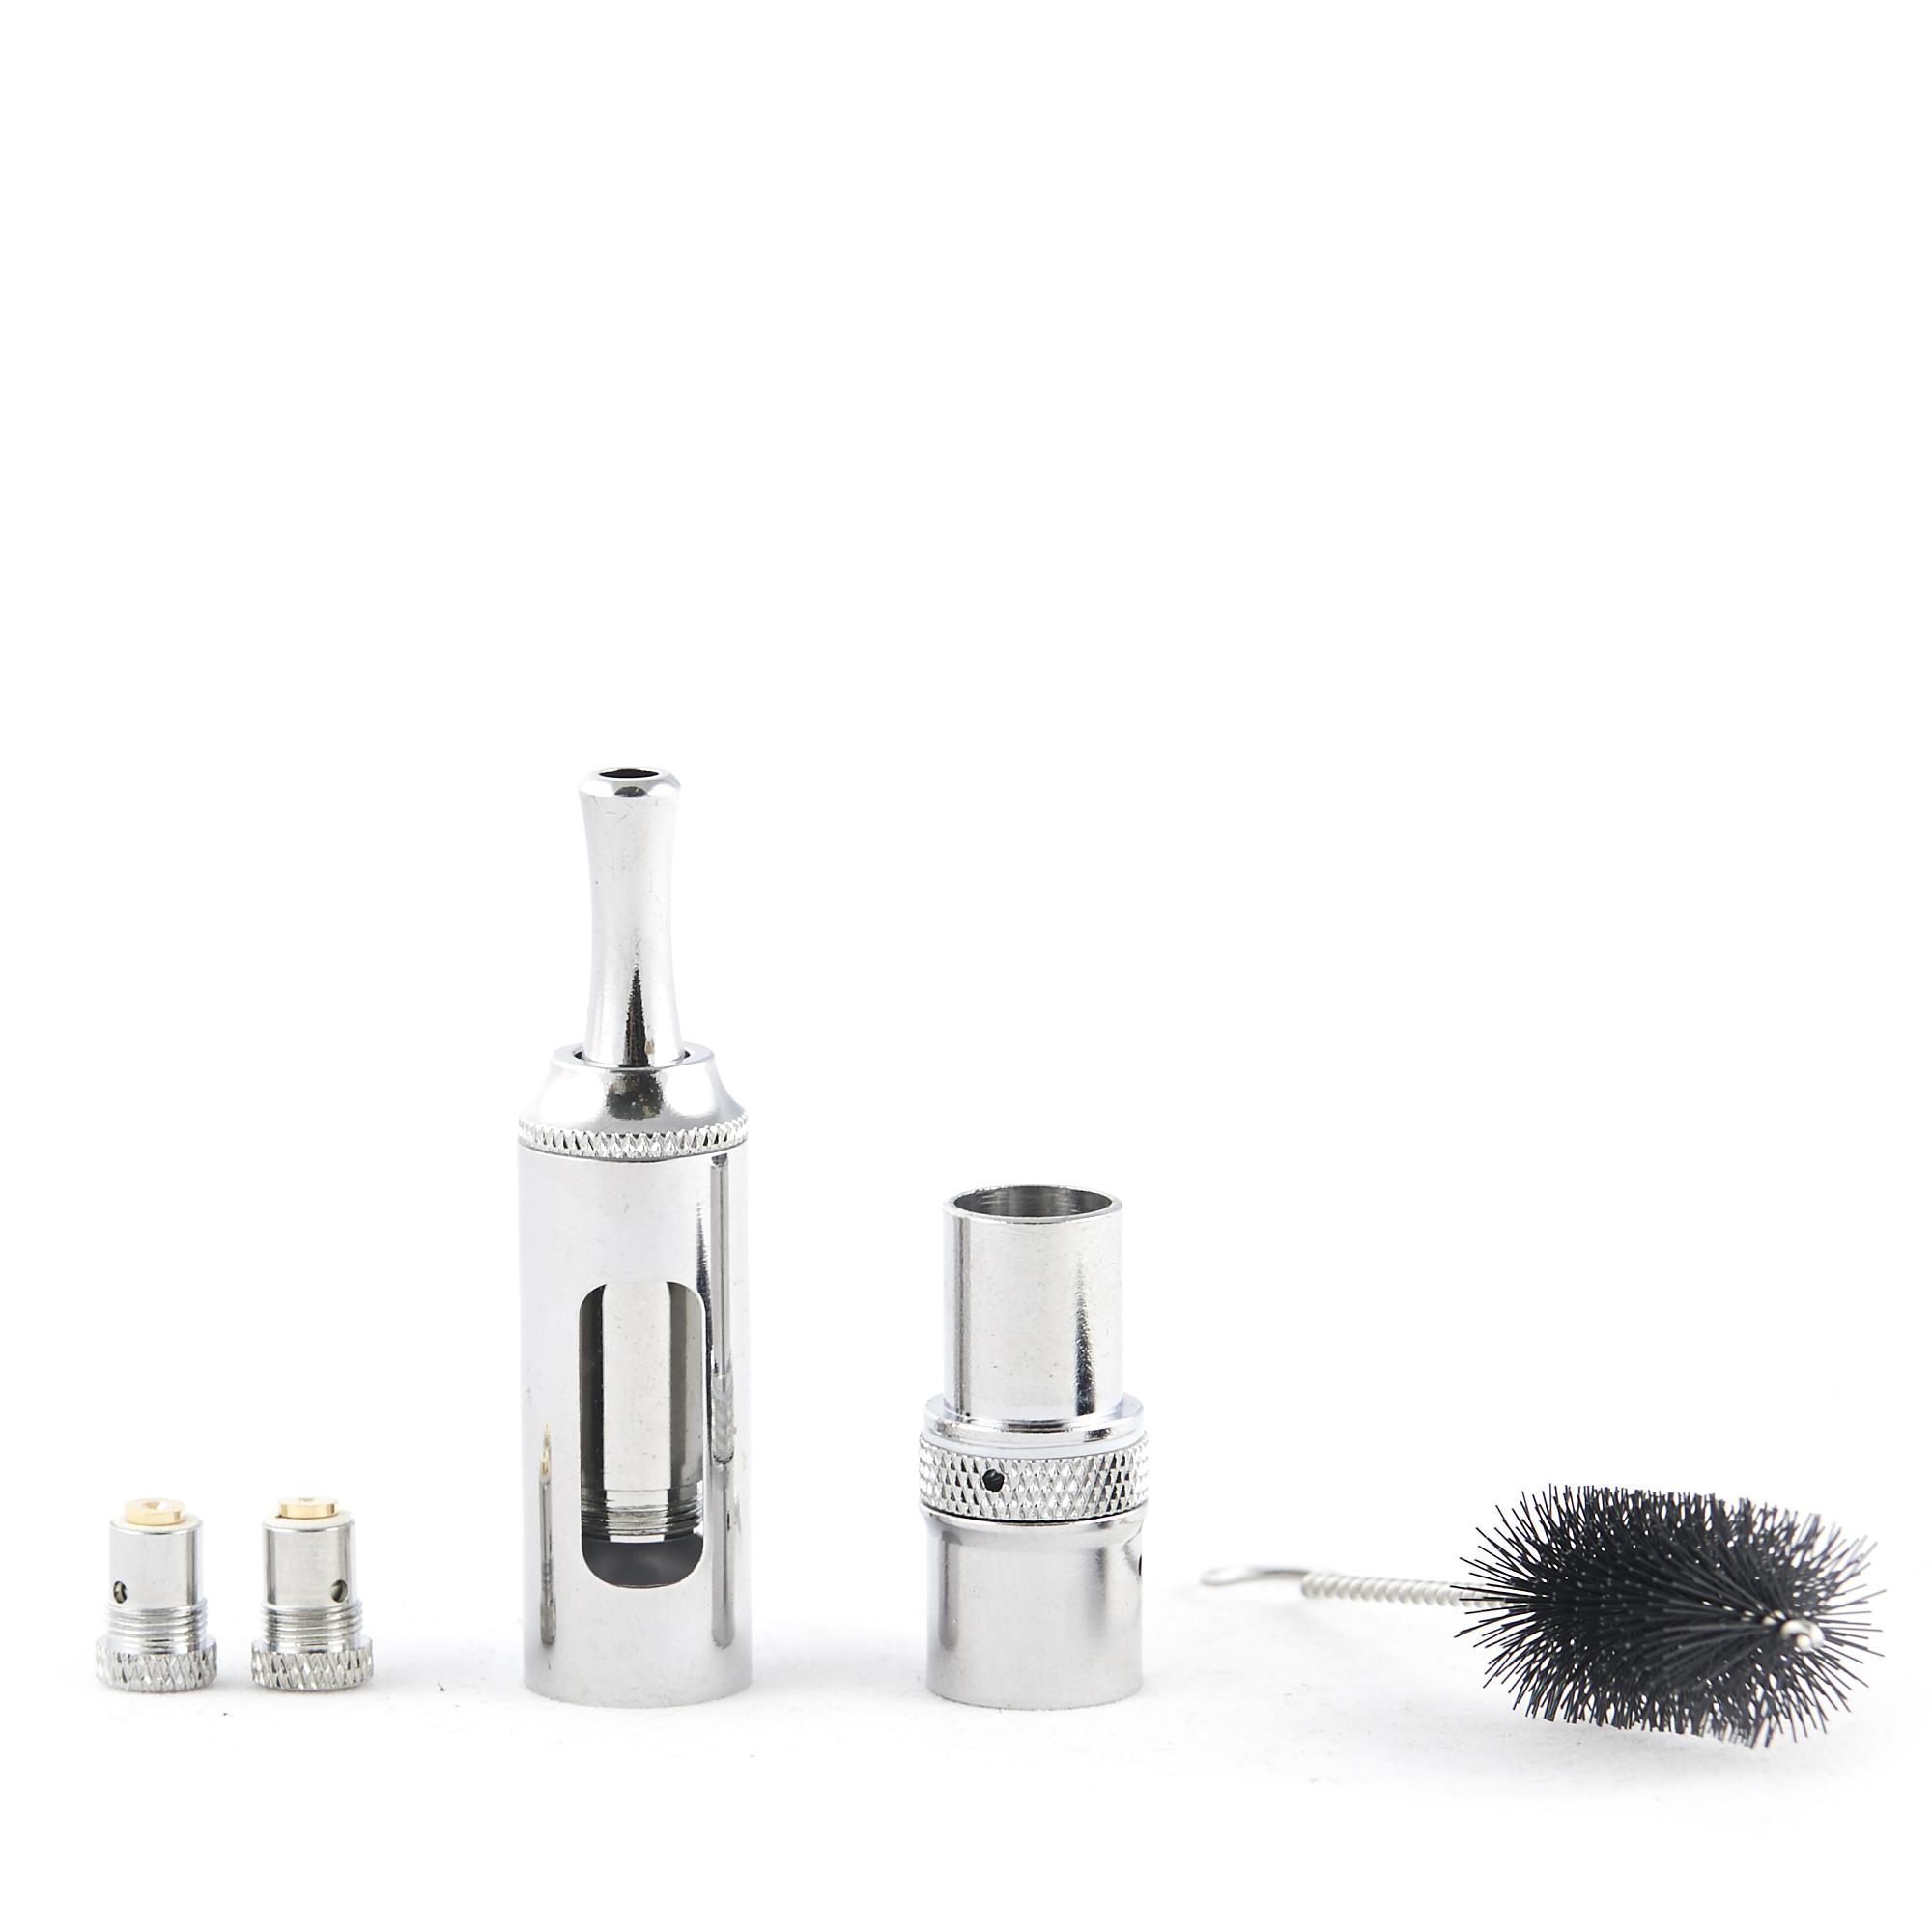 IBLISS TORCH ATOMIZER